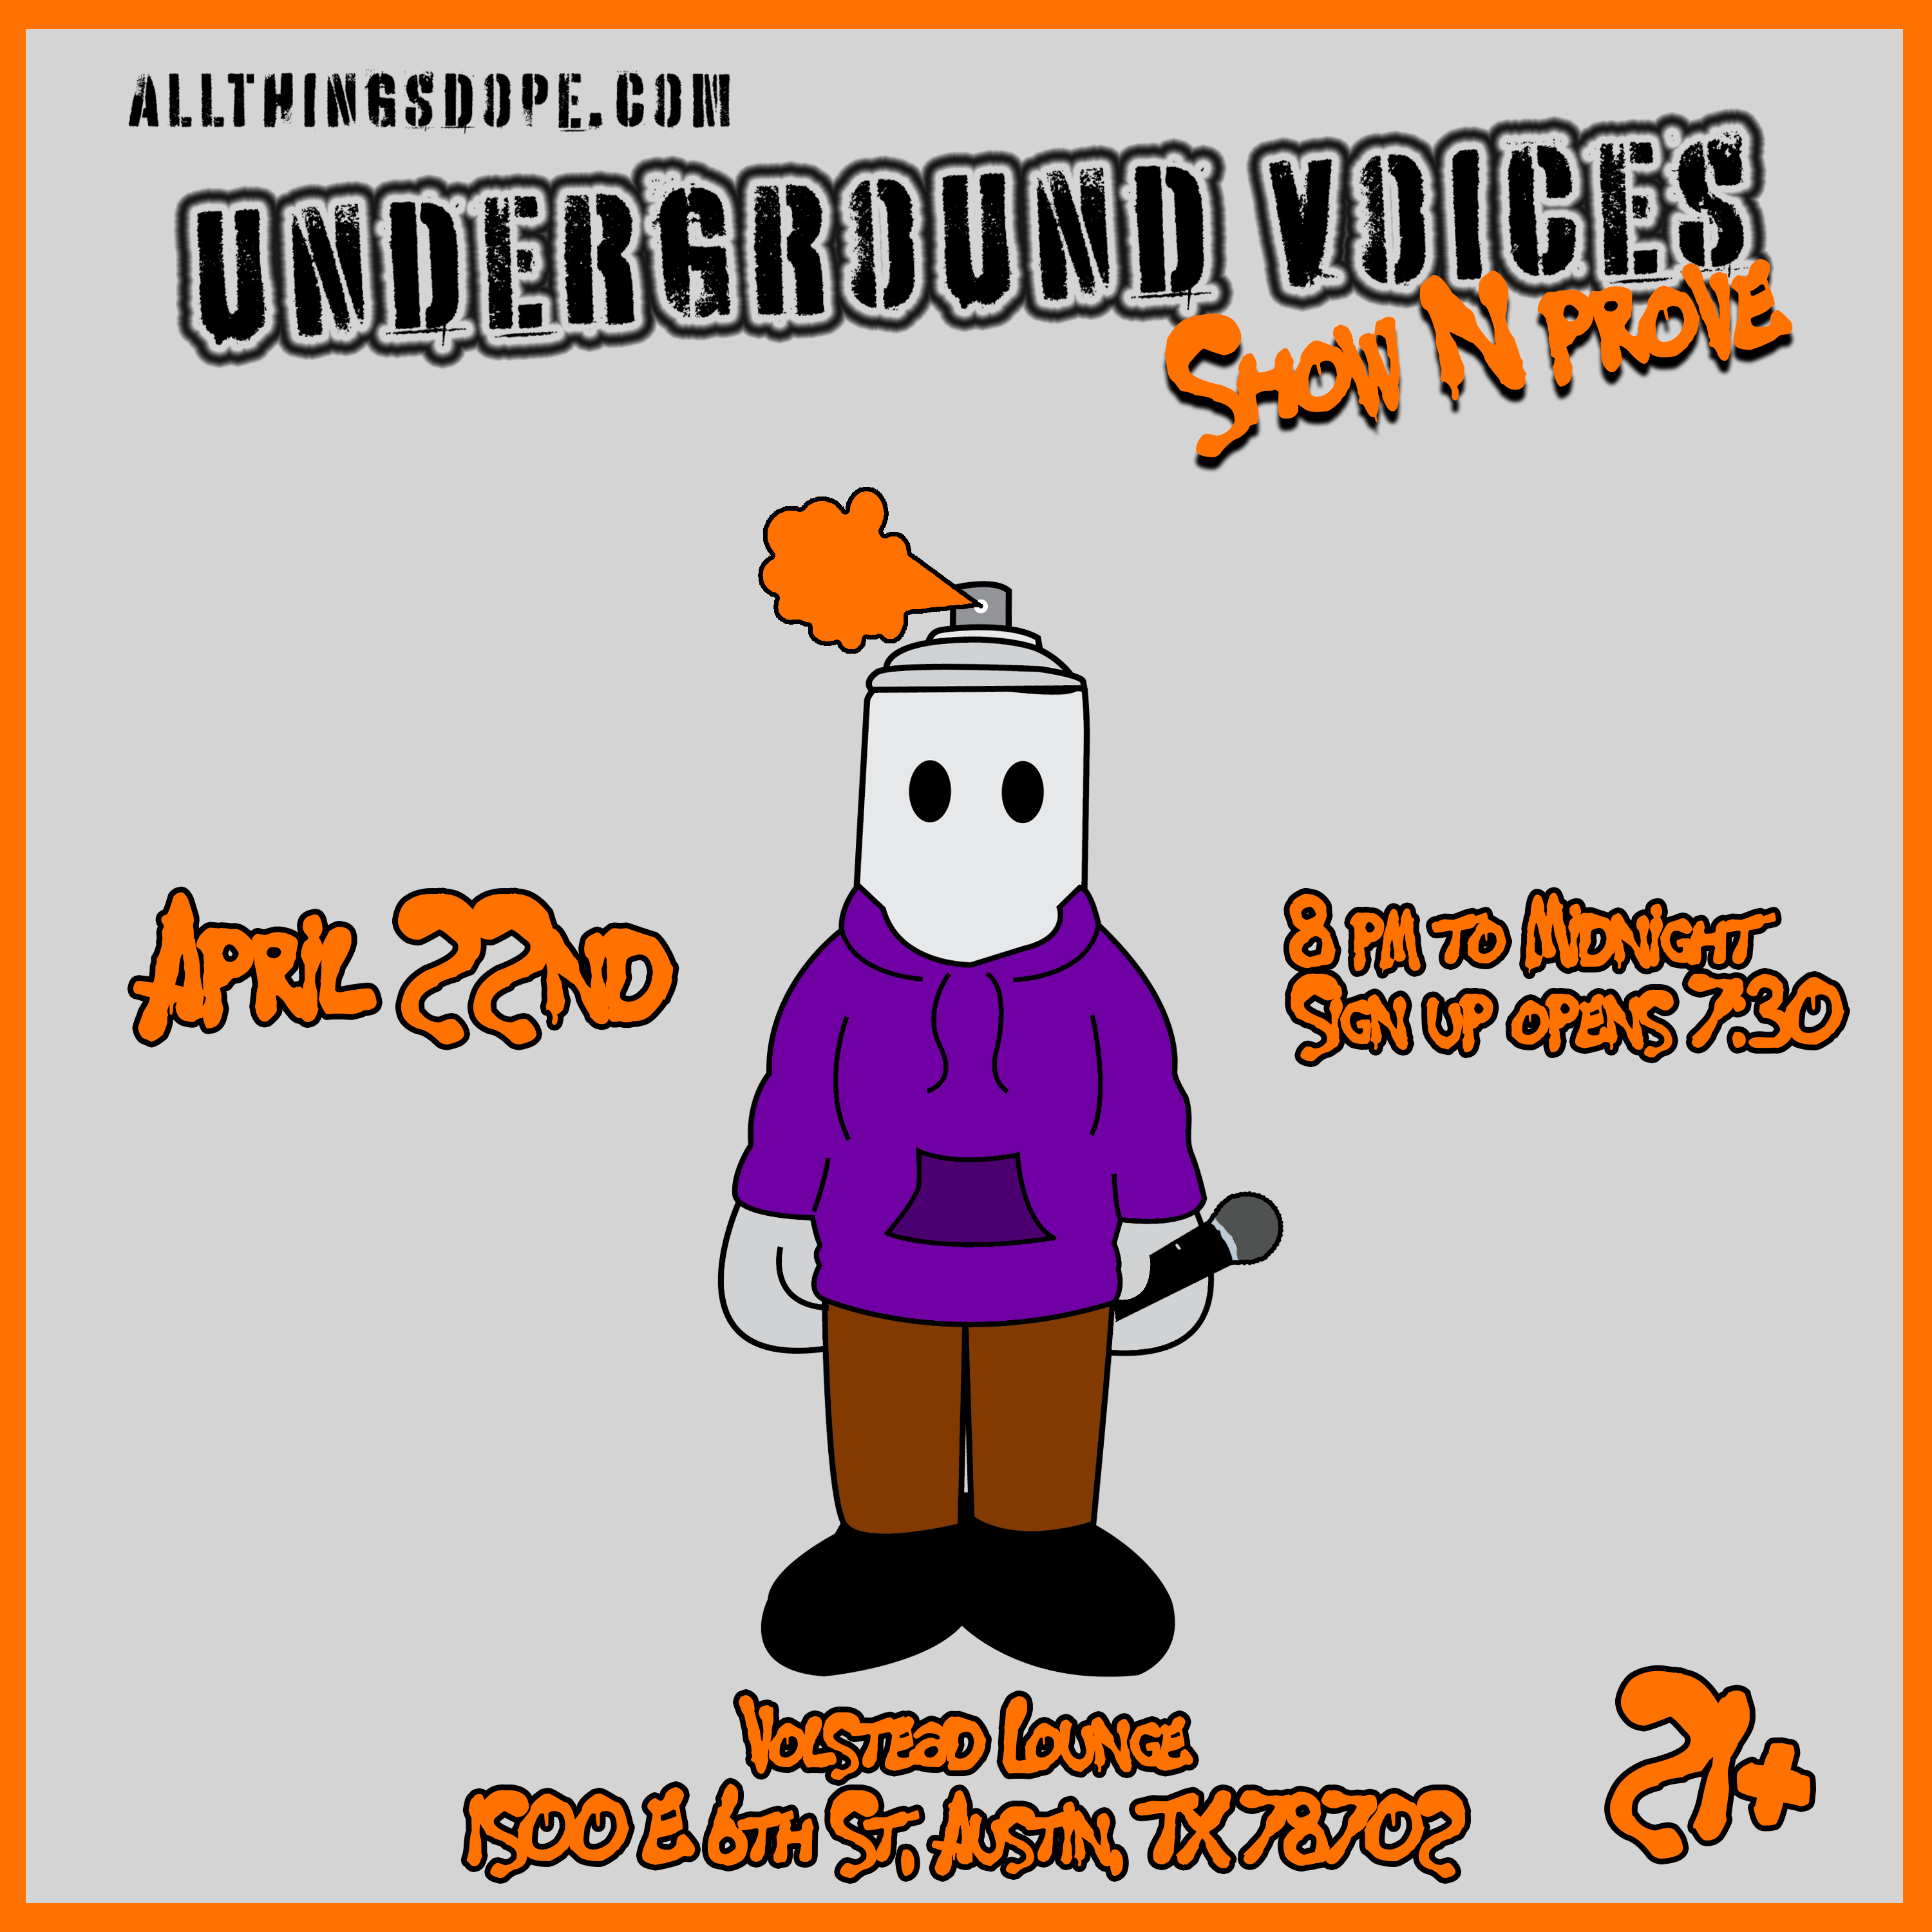 Underground Voices Show and Prove Open Mic @ Volstead Lounge